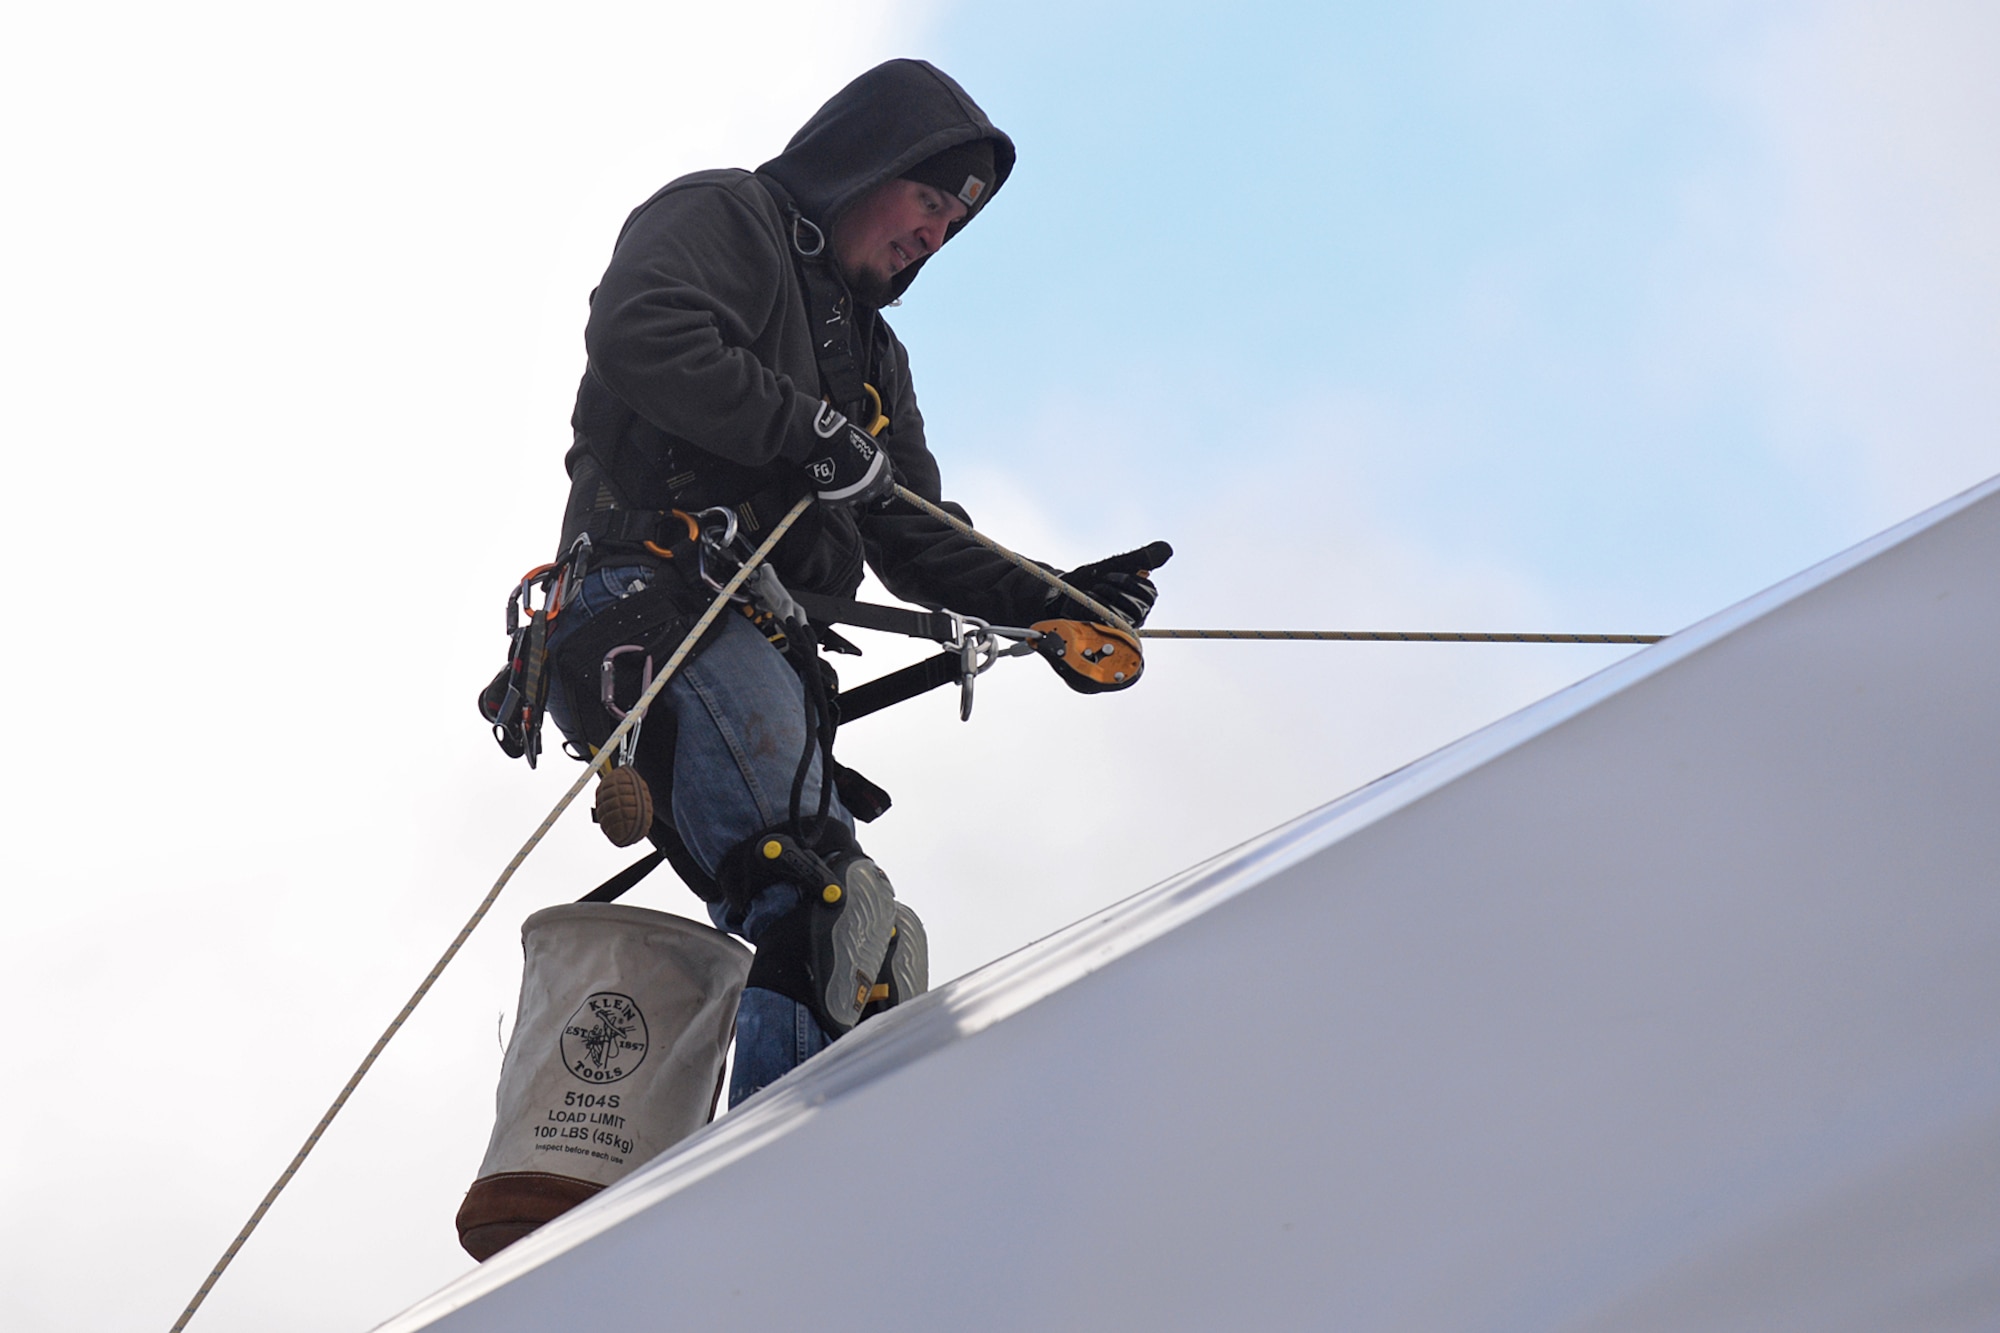 Justin Cevering, 526th Electronics Maintenance Squadron plastic fabricator inspector, uses a newly installed rope to repel down the side of a satellite communications radome at Cape Romanzof, Alaska, on Sep. 27, 2017. Ropes are secured to the tops of the radomes and allow inspectors to climb onto radome exteriors to perform maintenance. 
(U.S. Air Force photo by Alex R. Lloyd)